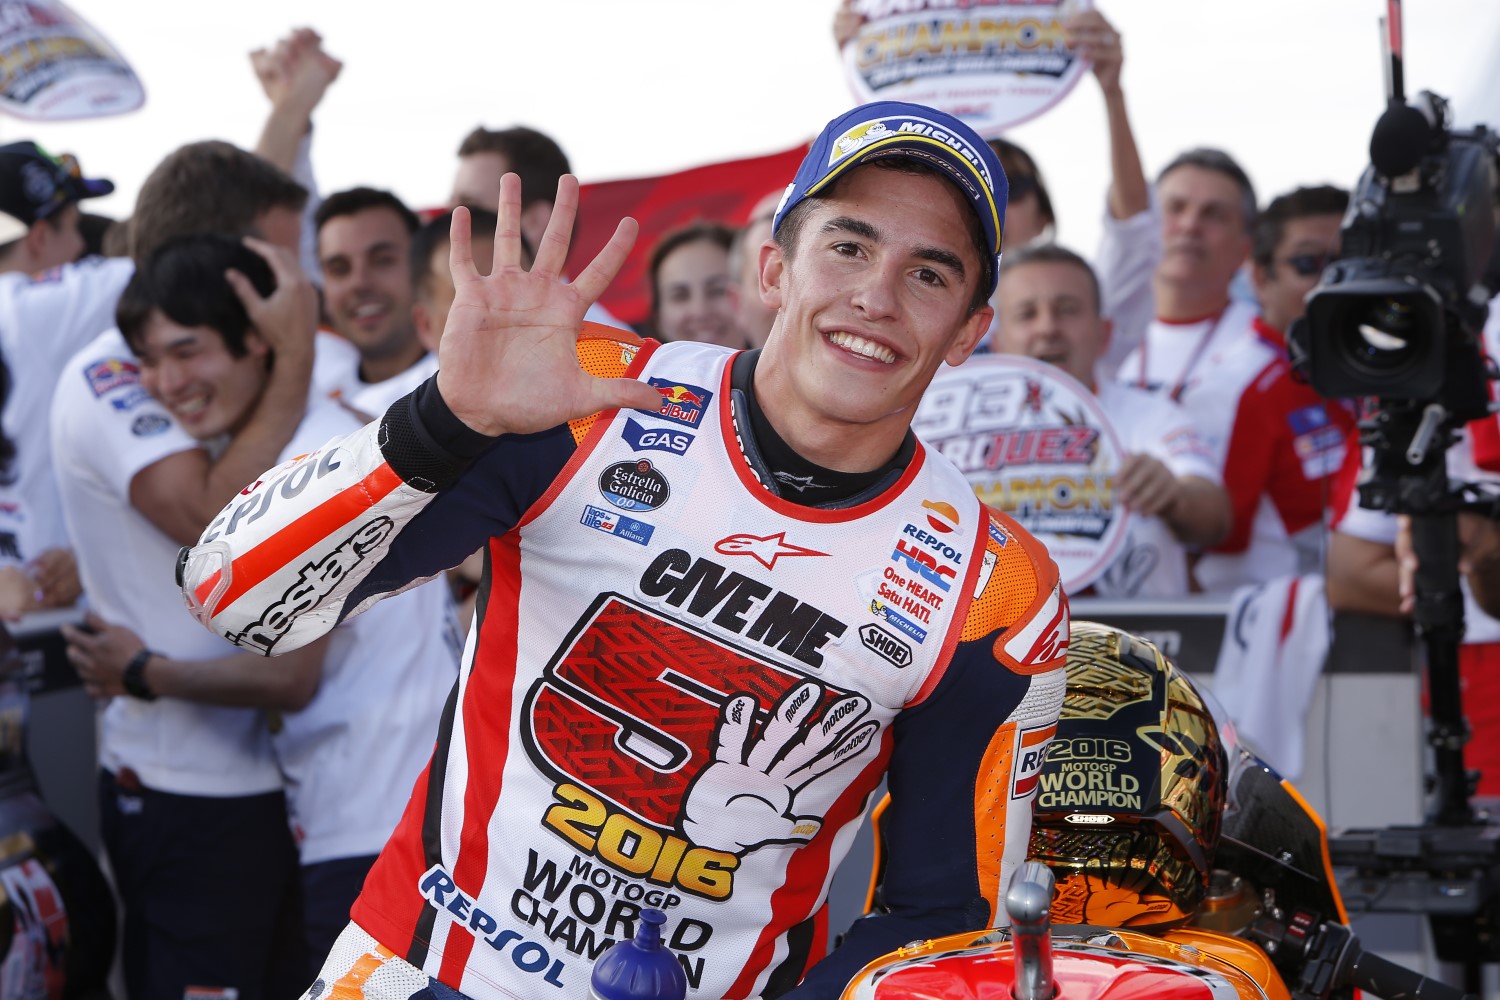 Five titles for Marquez and he is just 23